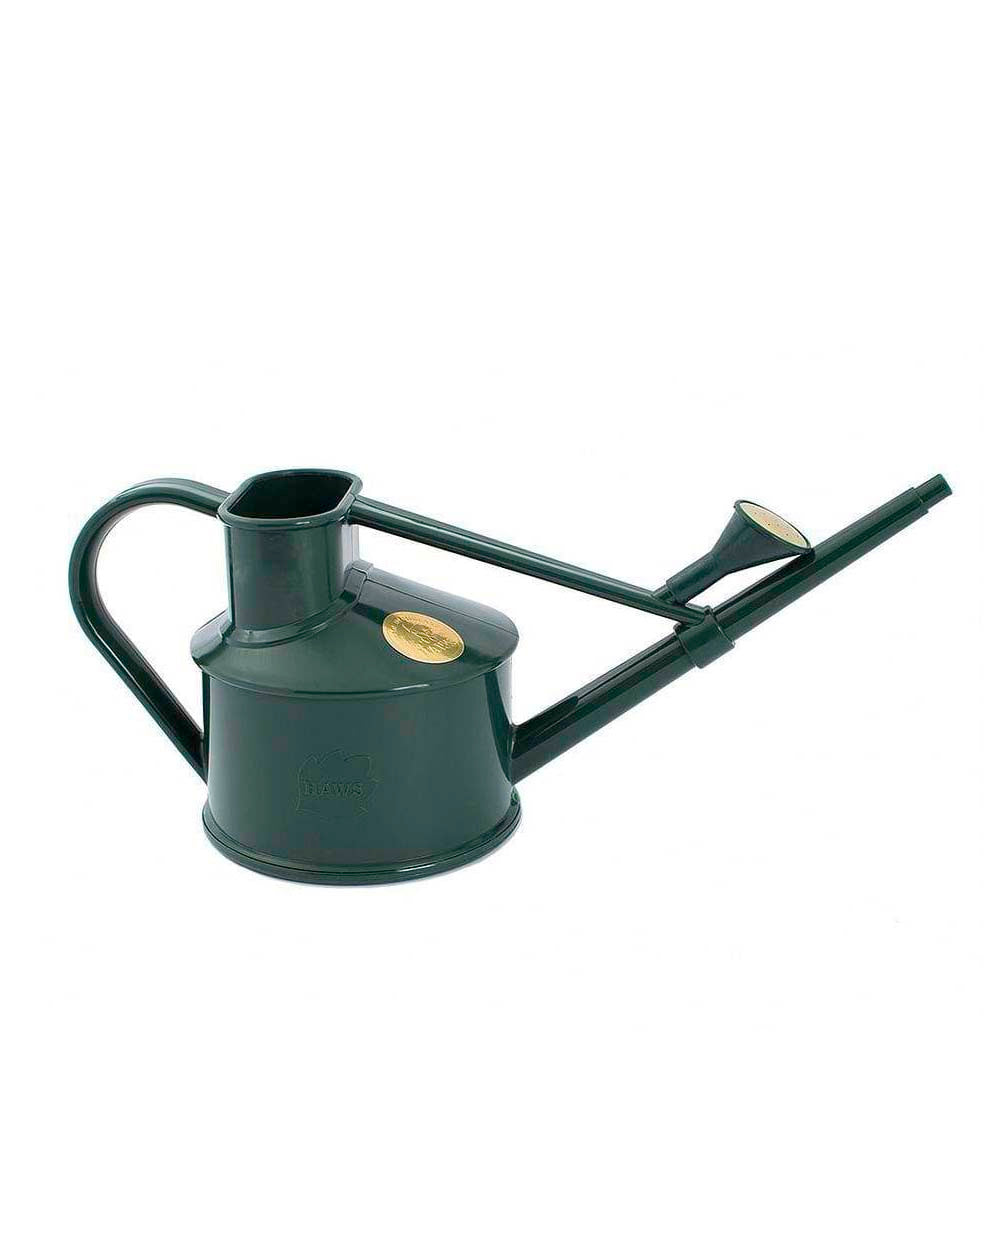 'Haws' - Watering Can (green, plastic, 0.7 litre)